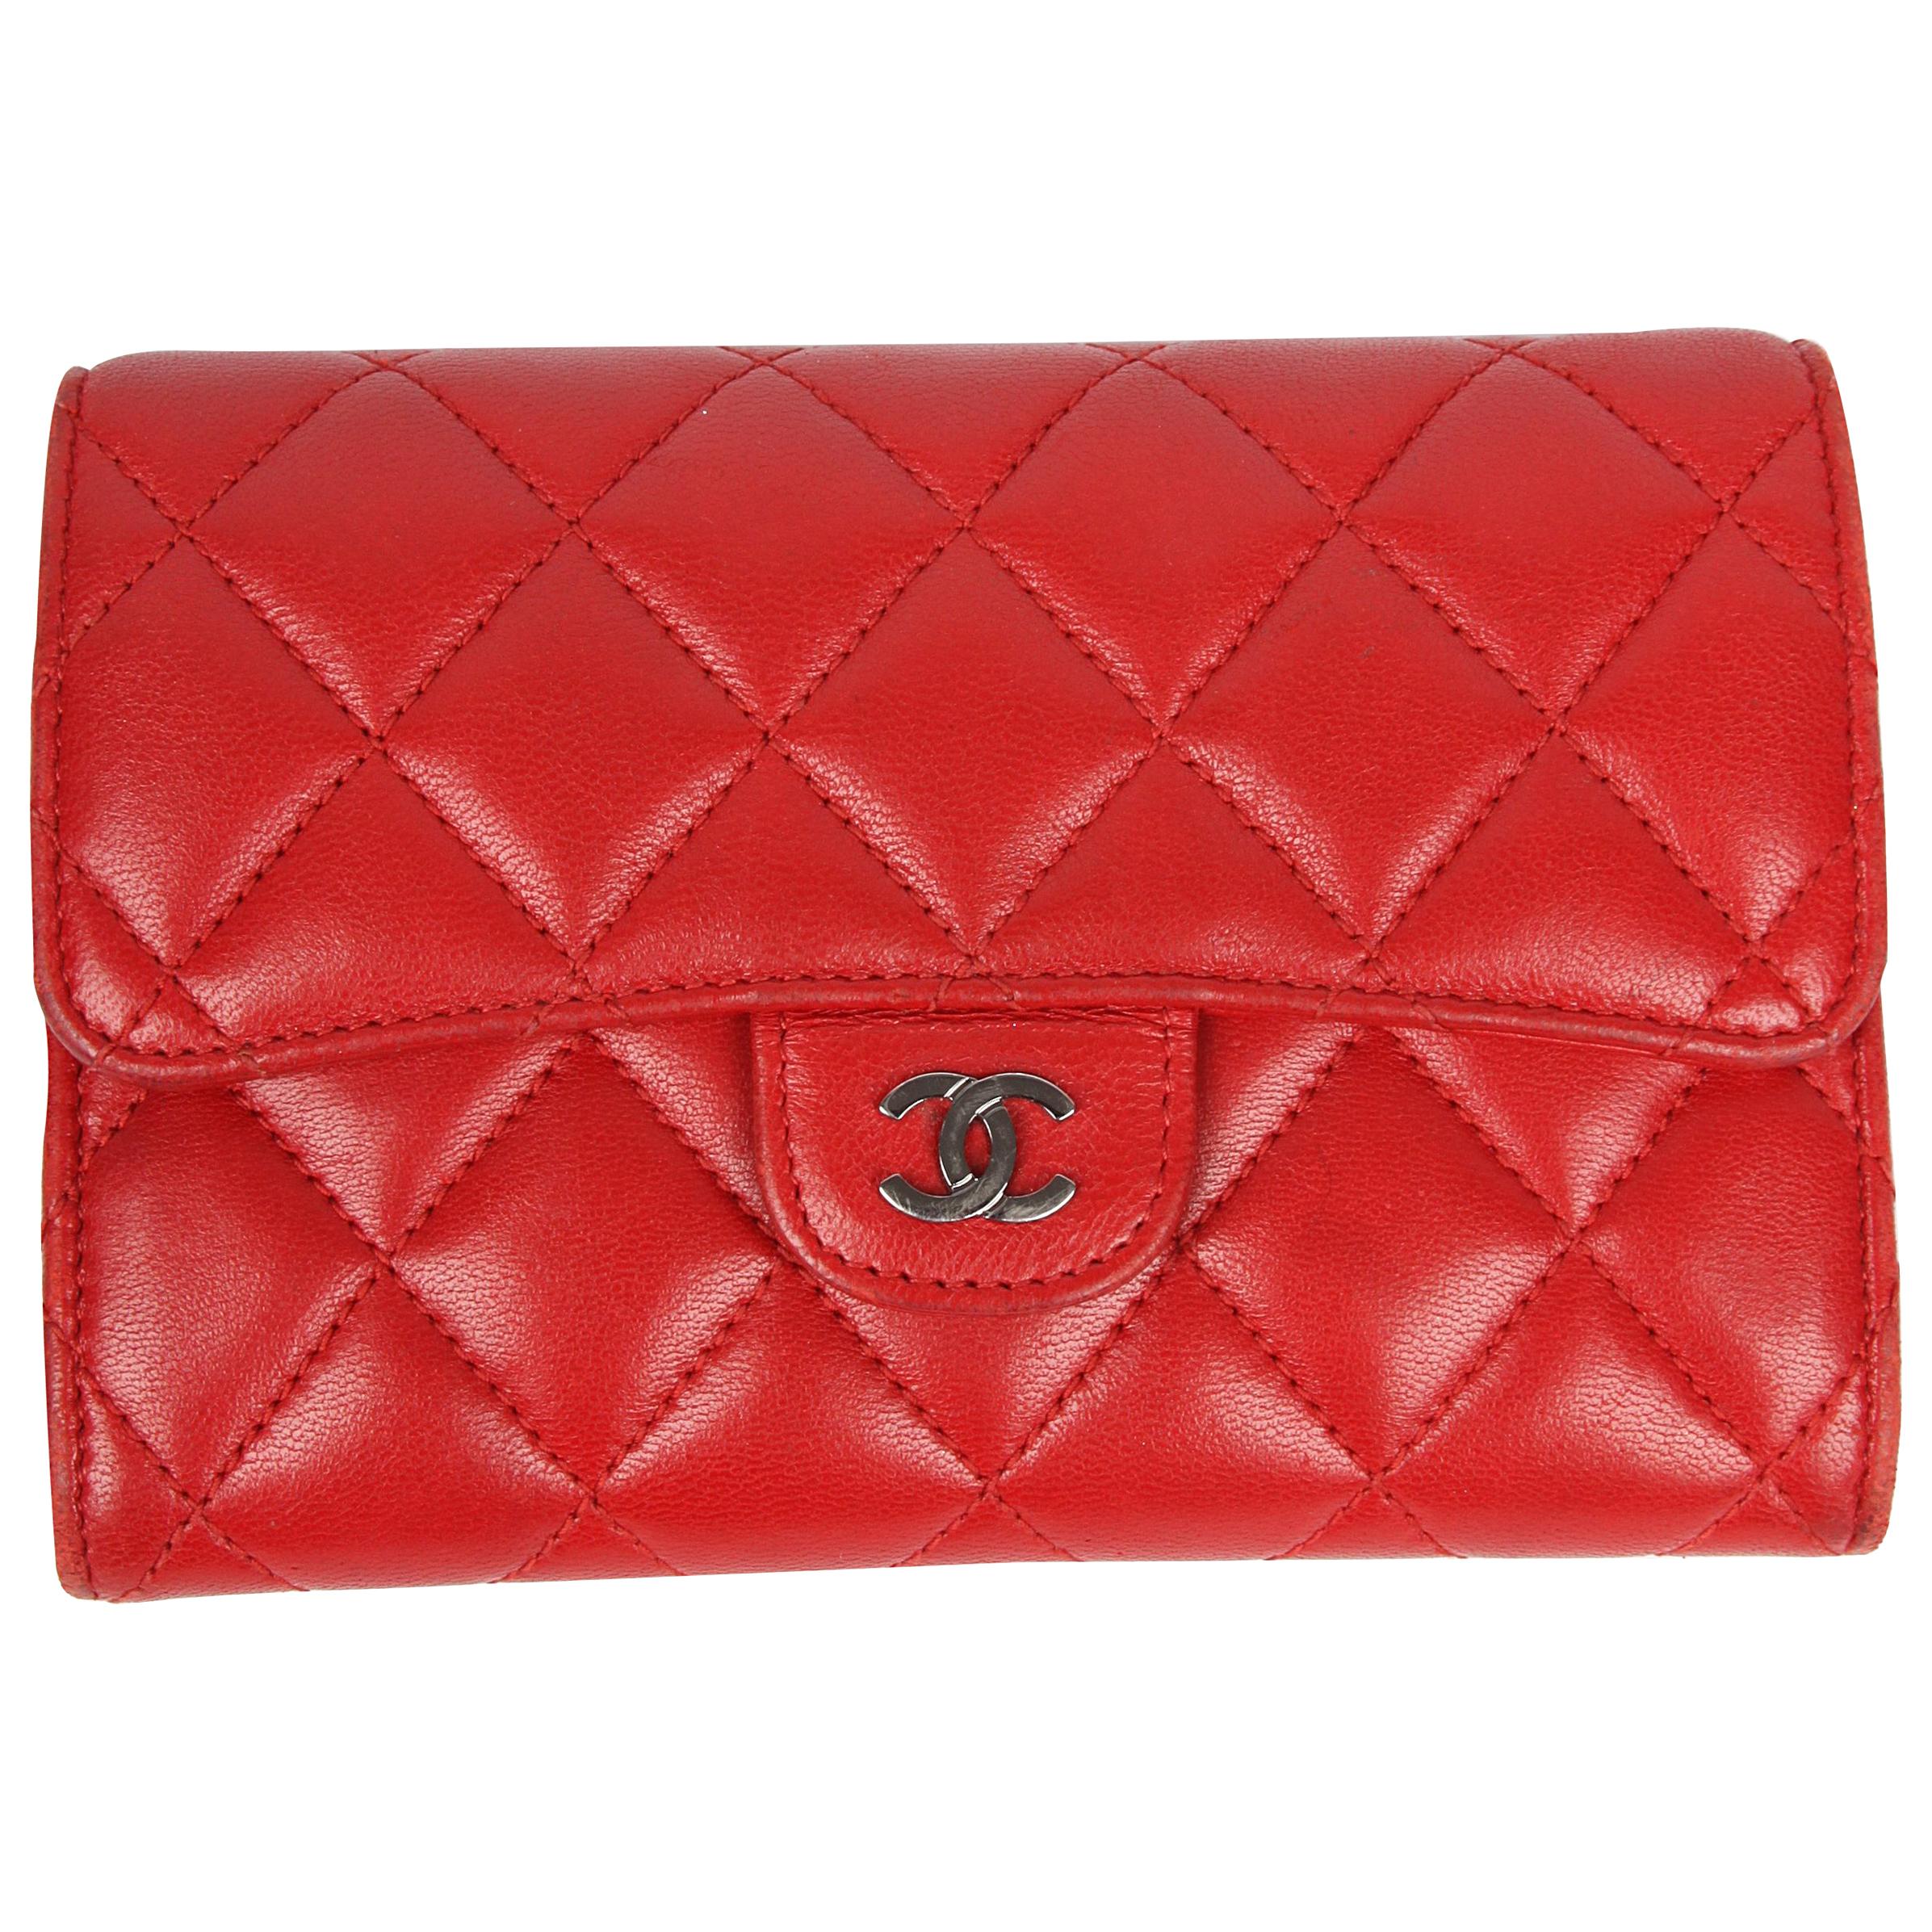 Chanel Quilted Wallet - red leather For Sale